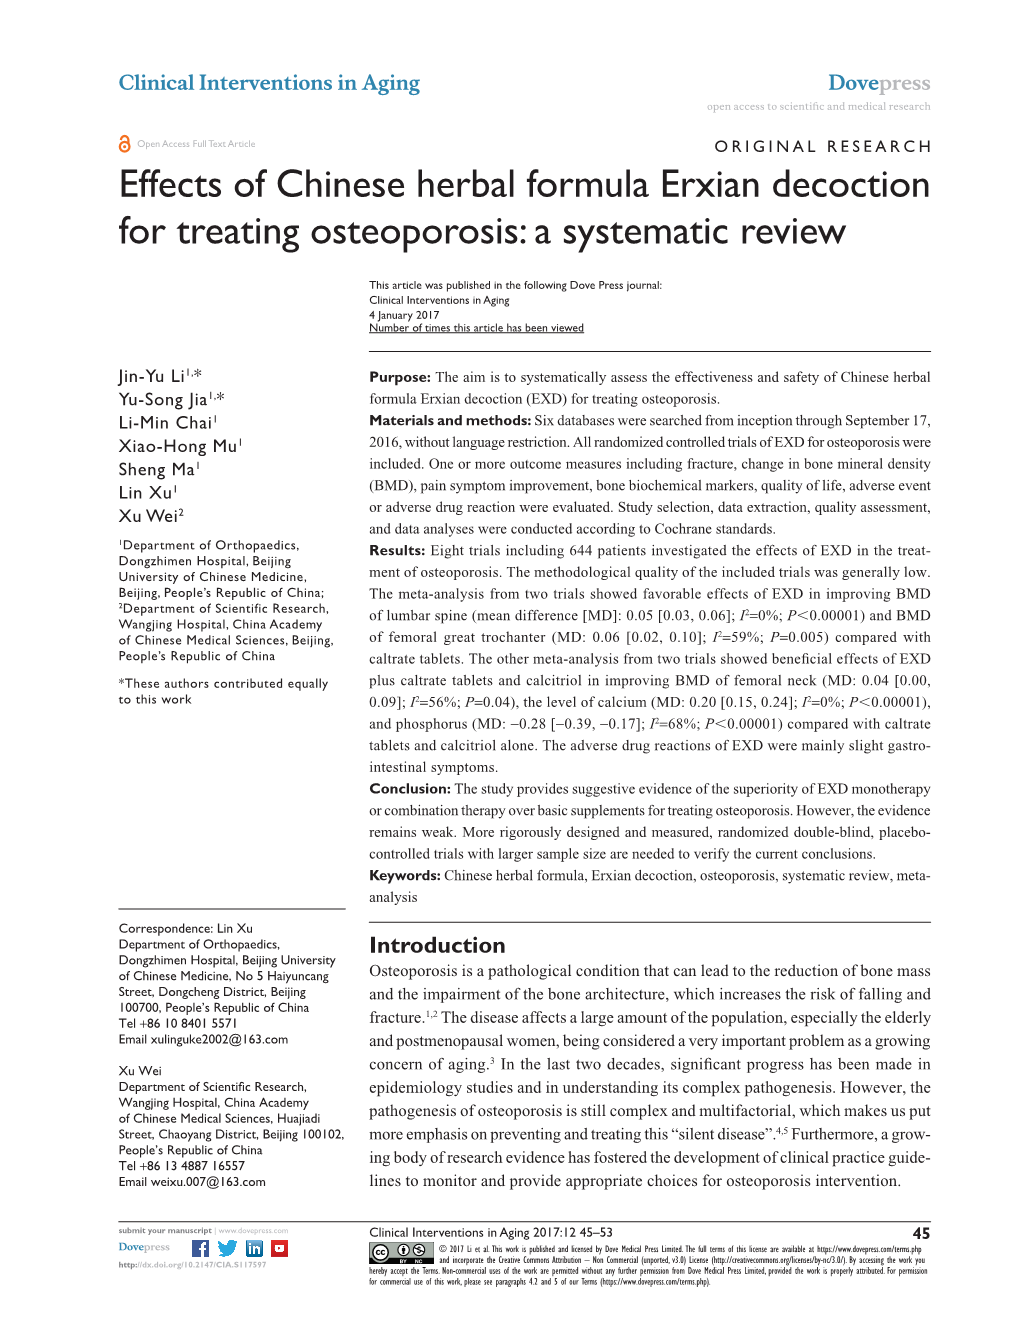 Effects of Chinese Herbal Formula Erxian Decoction for Treating Osteoporosis: a Systematic Review